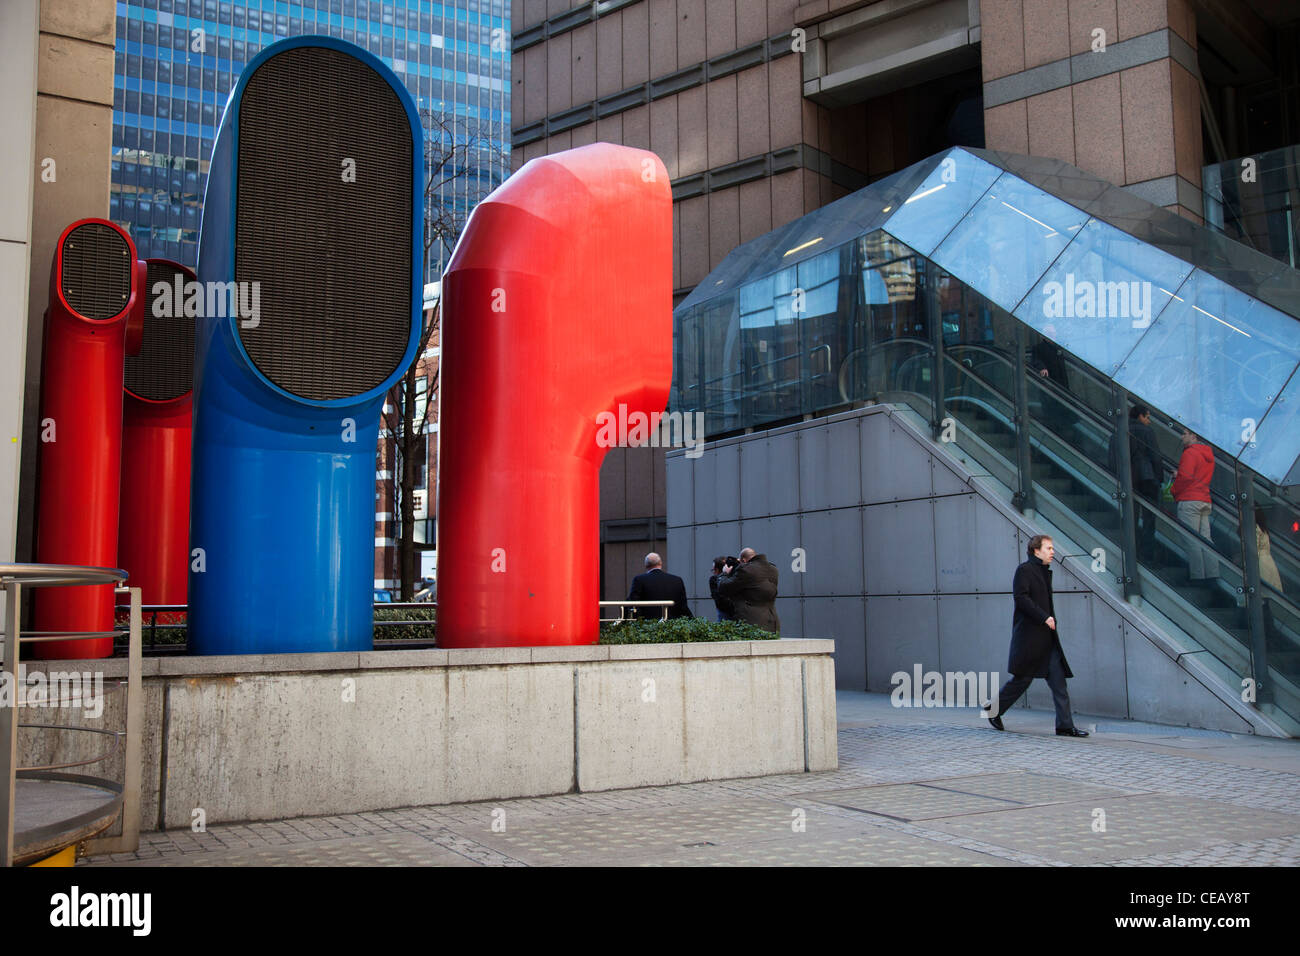 Vents 88 on London Wall by architect Richard Rogers. Red and blue funnel like ventilation system part of office building. Stock Photo